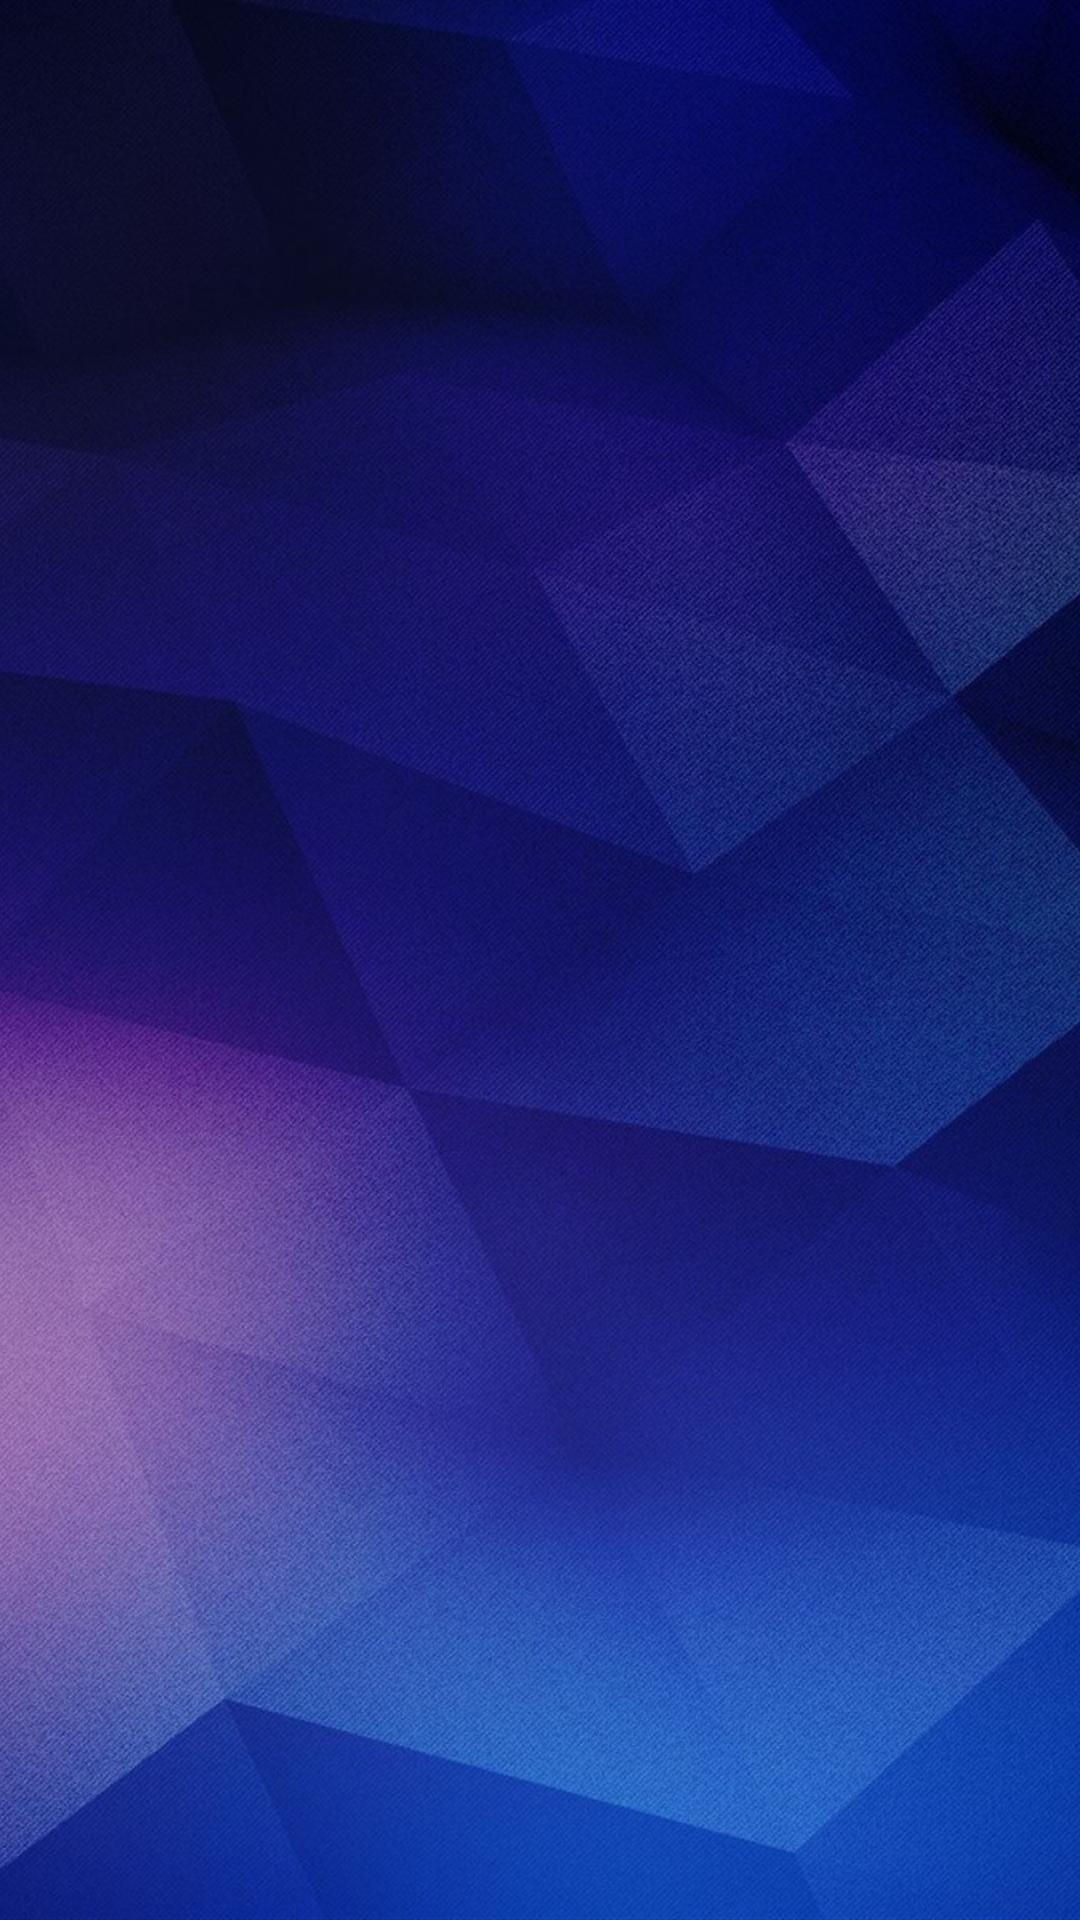 plus hd texture triangles abstraction iphone 6 plus wallpapers